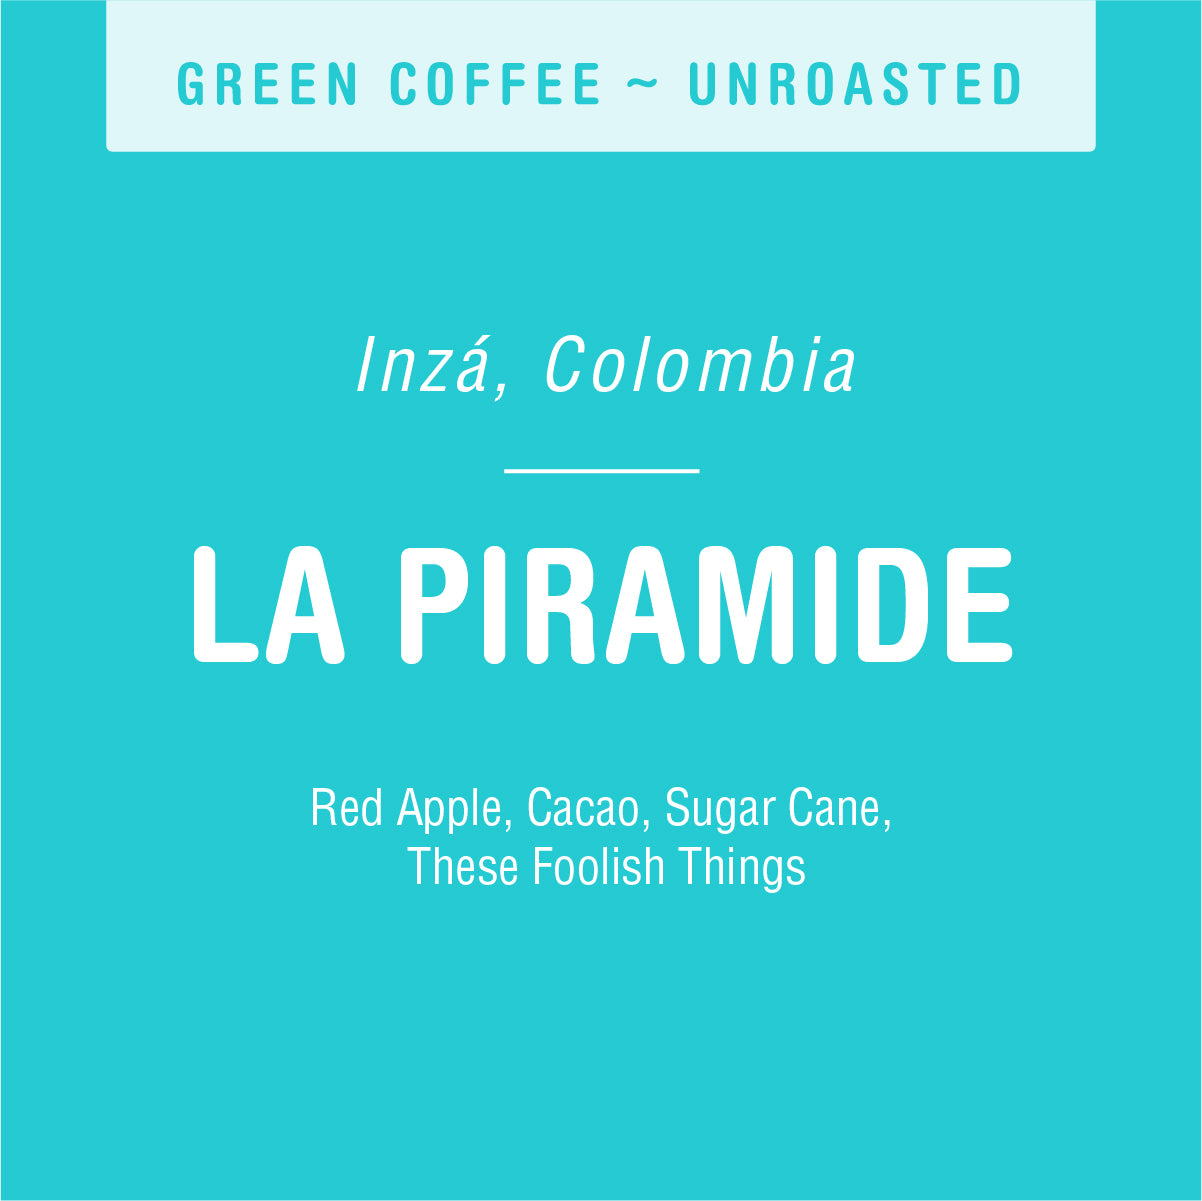 Graphic of green coffee package labeled "La Piramide (GREEN)" from Inzá, Colombia, representing Colombian coffee. Contains taste notes of red apple, cacao, and sugar cane. Text "Green Coffee ~ Tandem Coffee Roasters